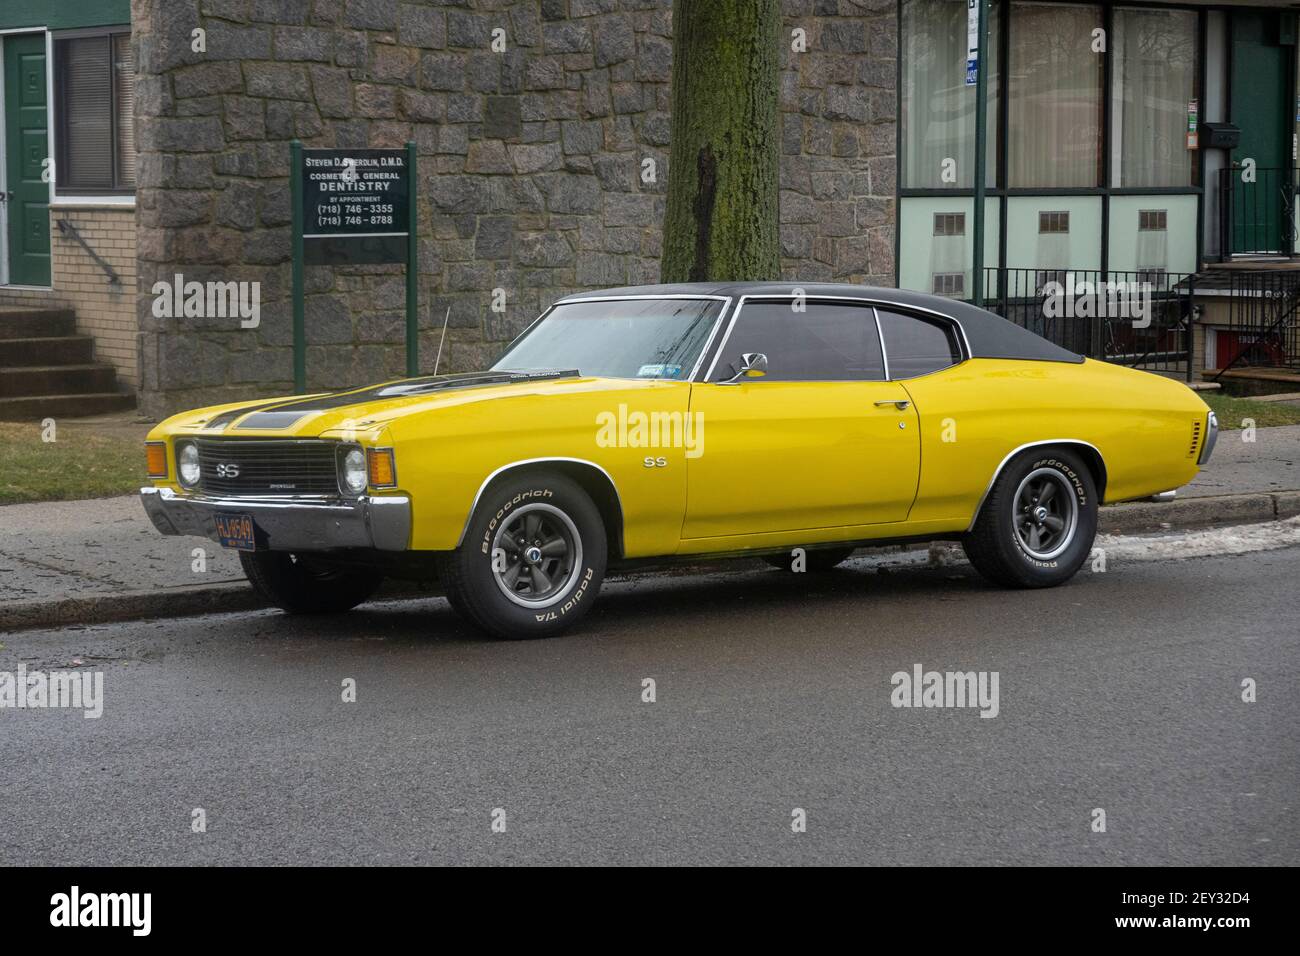 A yellow & black Chevy Chevelle Super Sport that appears to  be refurbished. Parked in Whitestone, Queens, New York City. Stock Photo